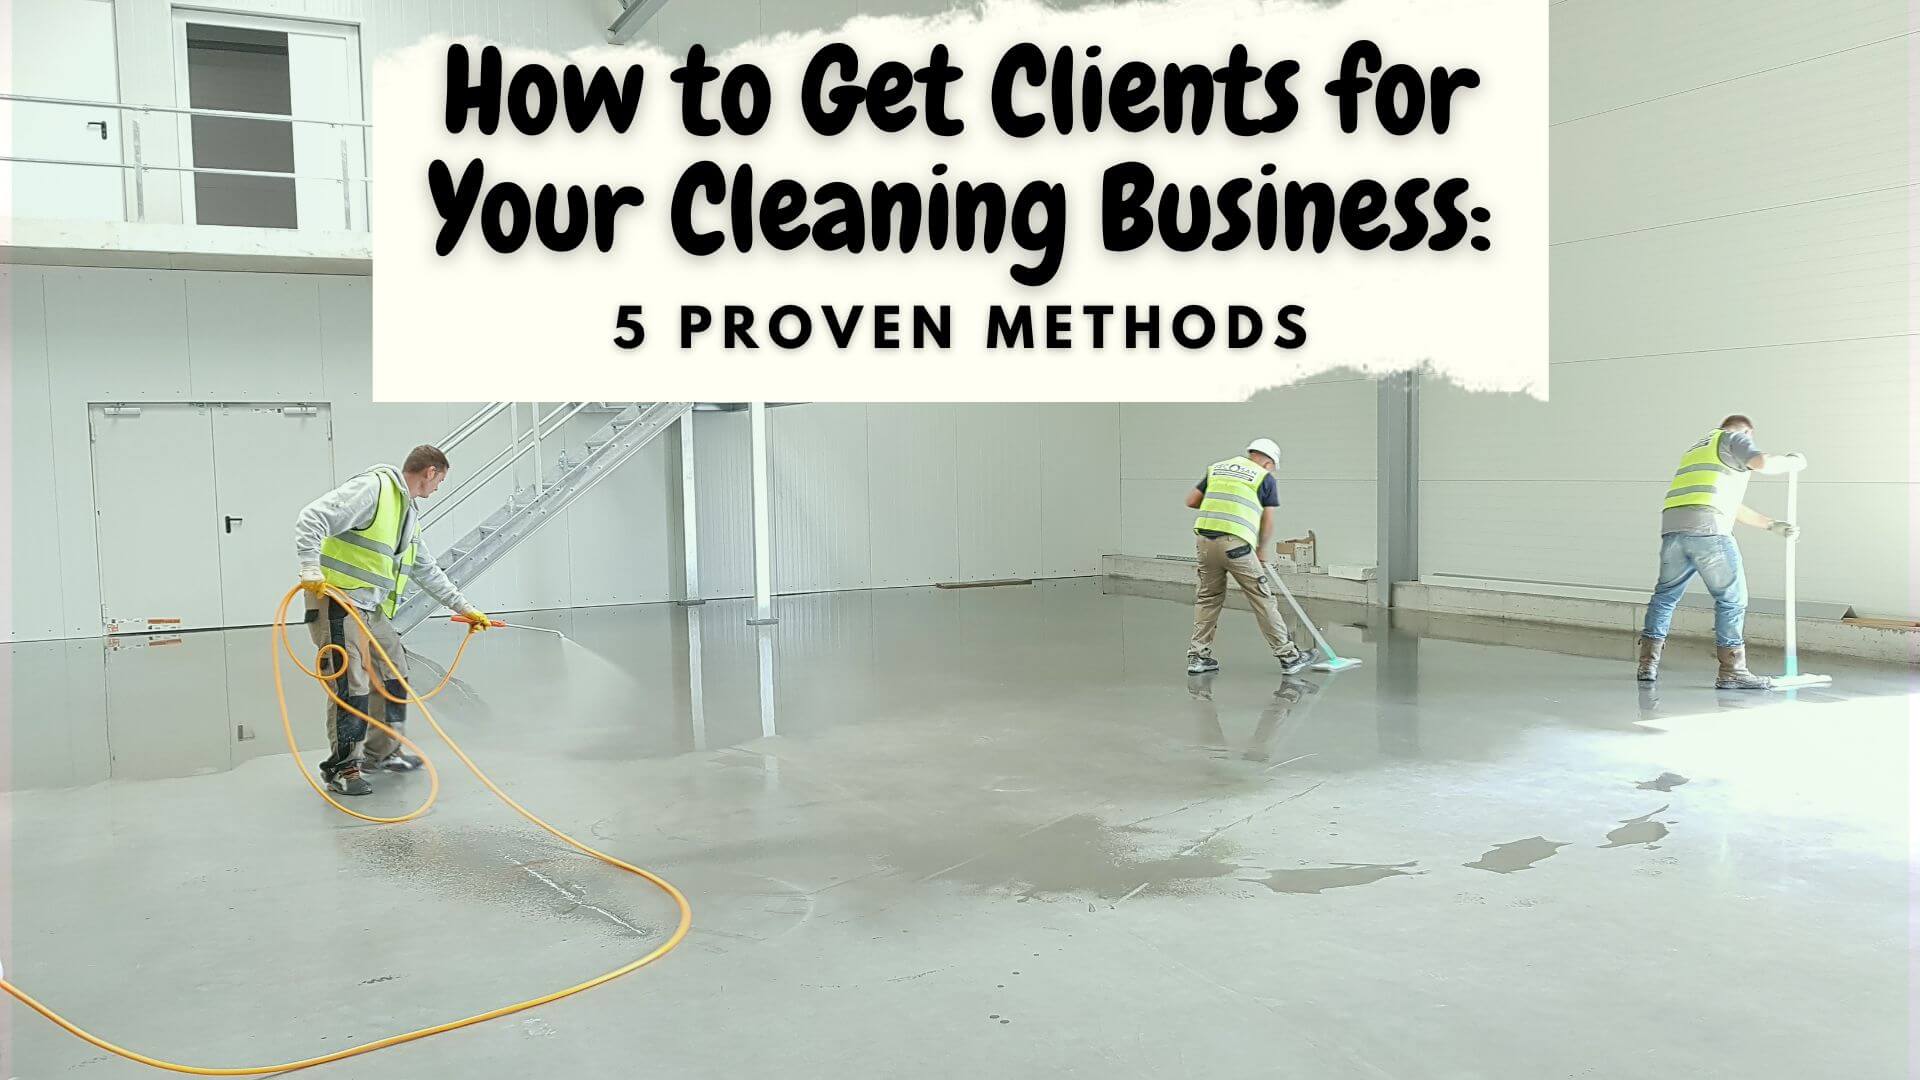 How to get clients for a cleaning business? Here are five proven methods that will help you attract new customers and grow your business!